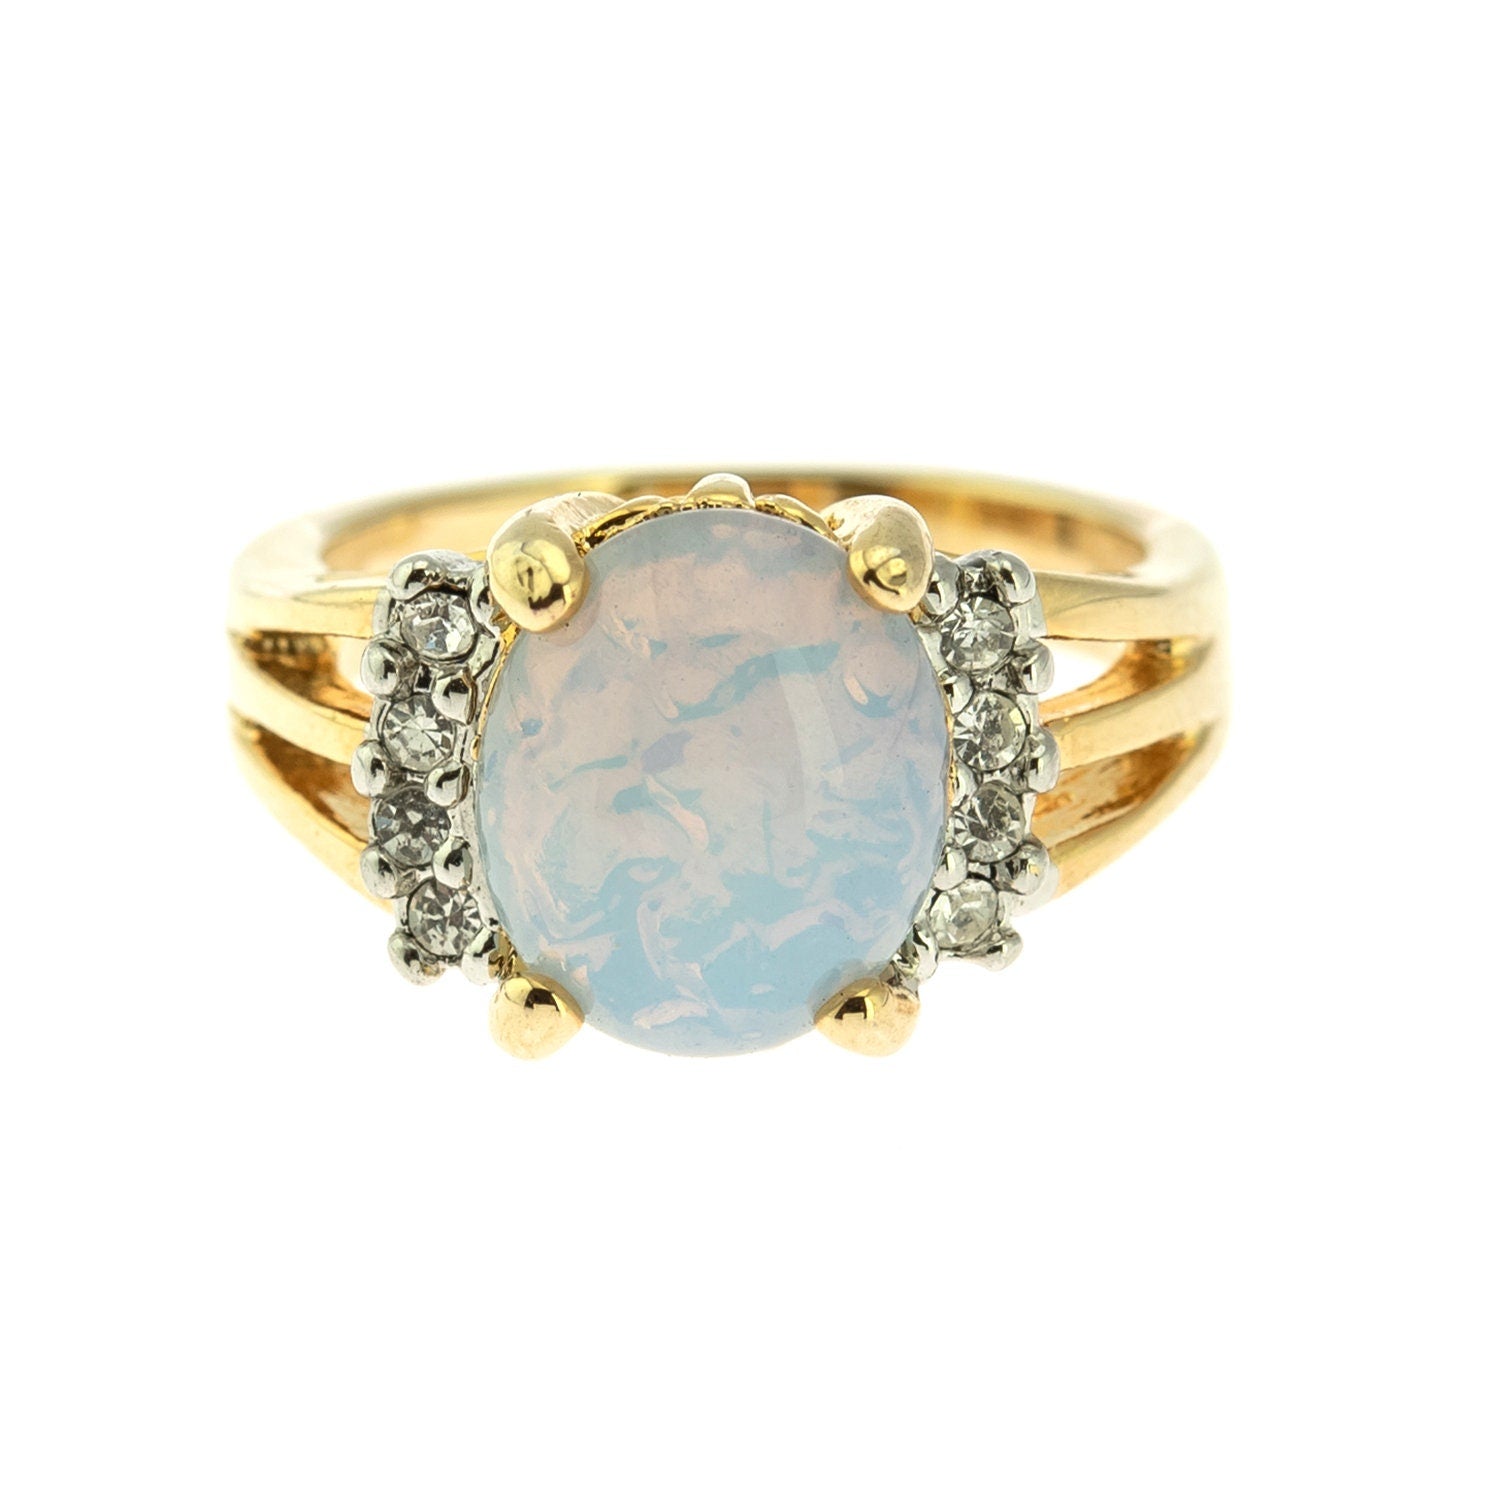 Vintage Ring 1980's Jelly Opal Ring with Clear Swarovski Crystals 18k Gold Antique Womans Jewelry R1664 - Limited Stock - Never Worn